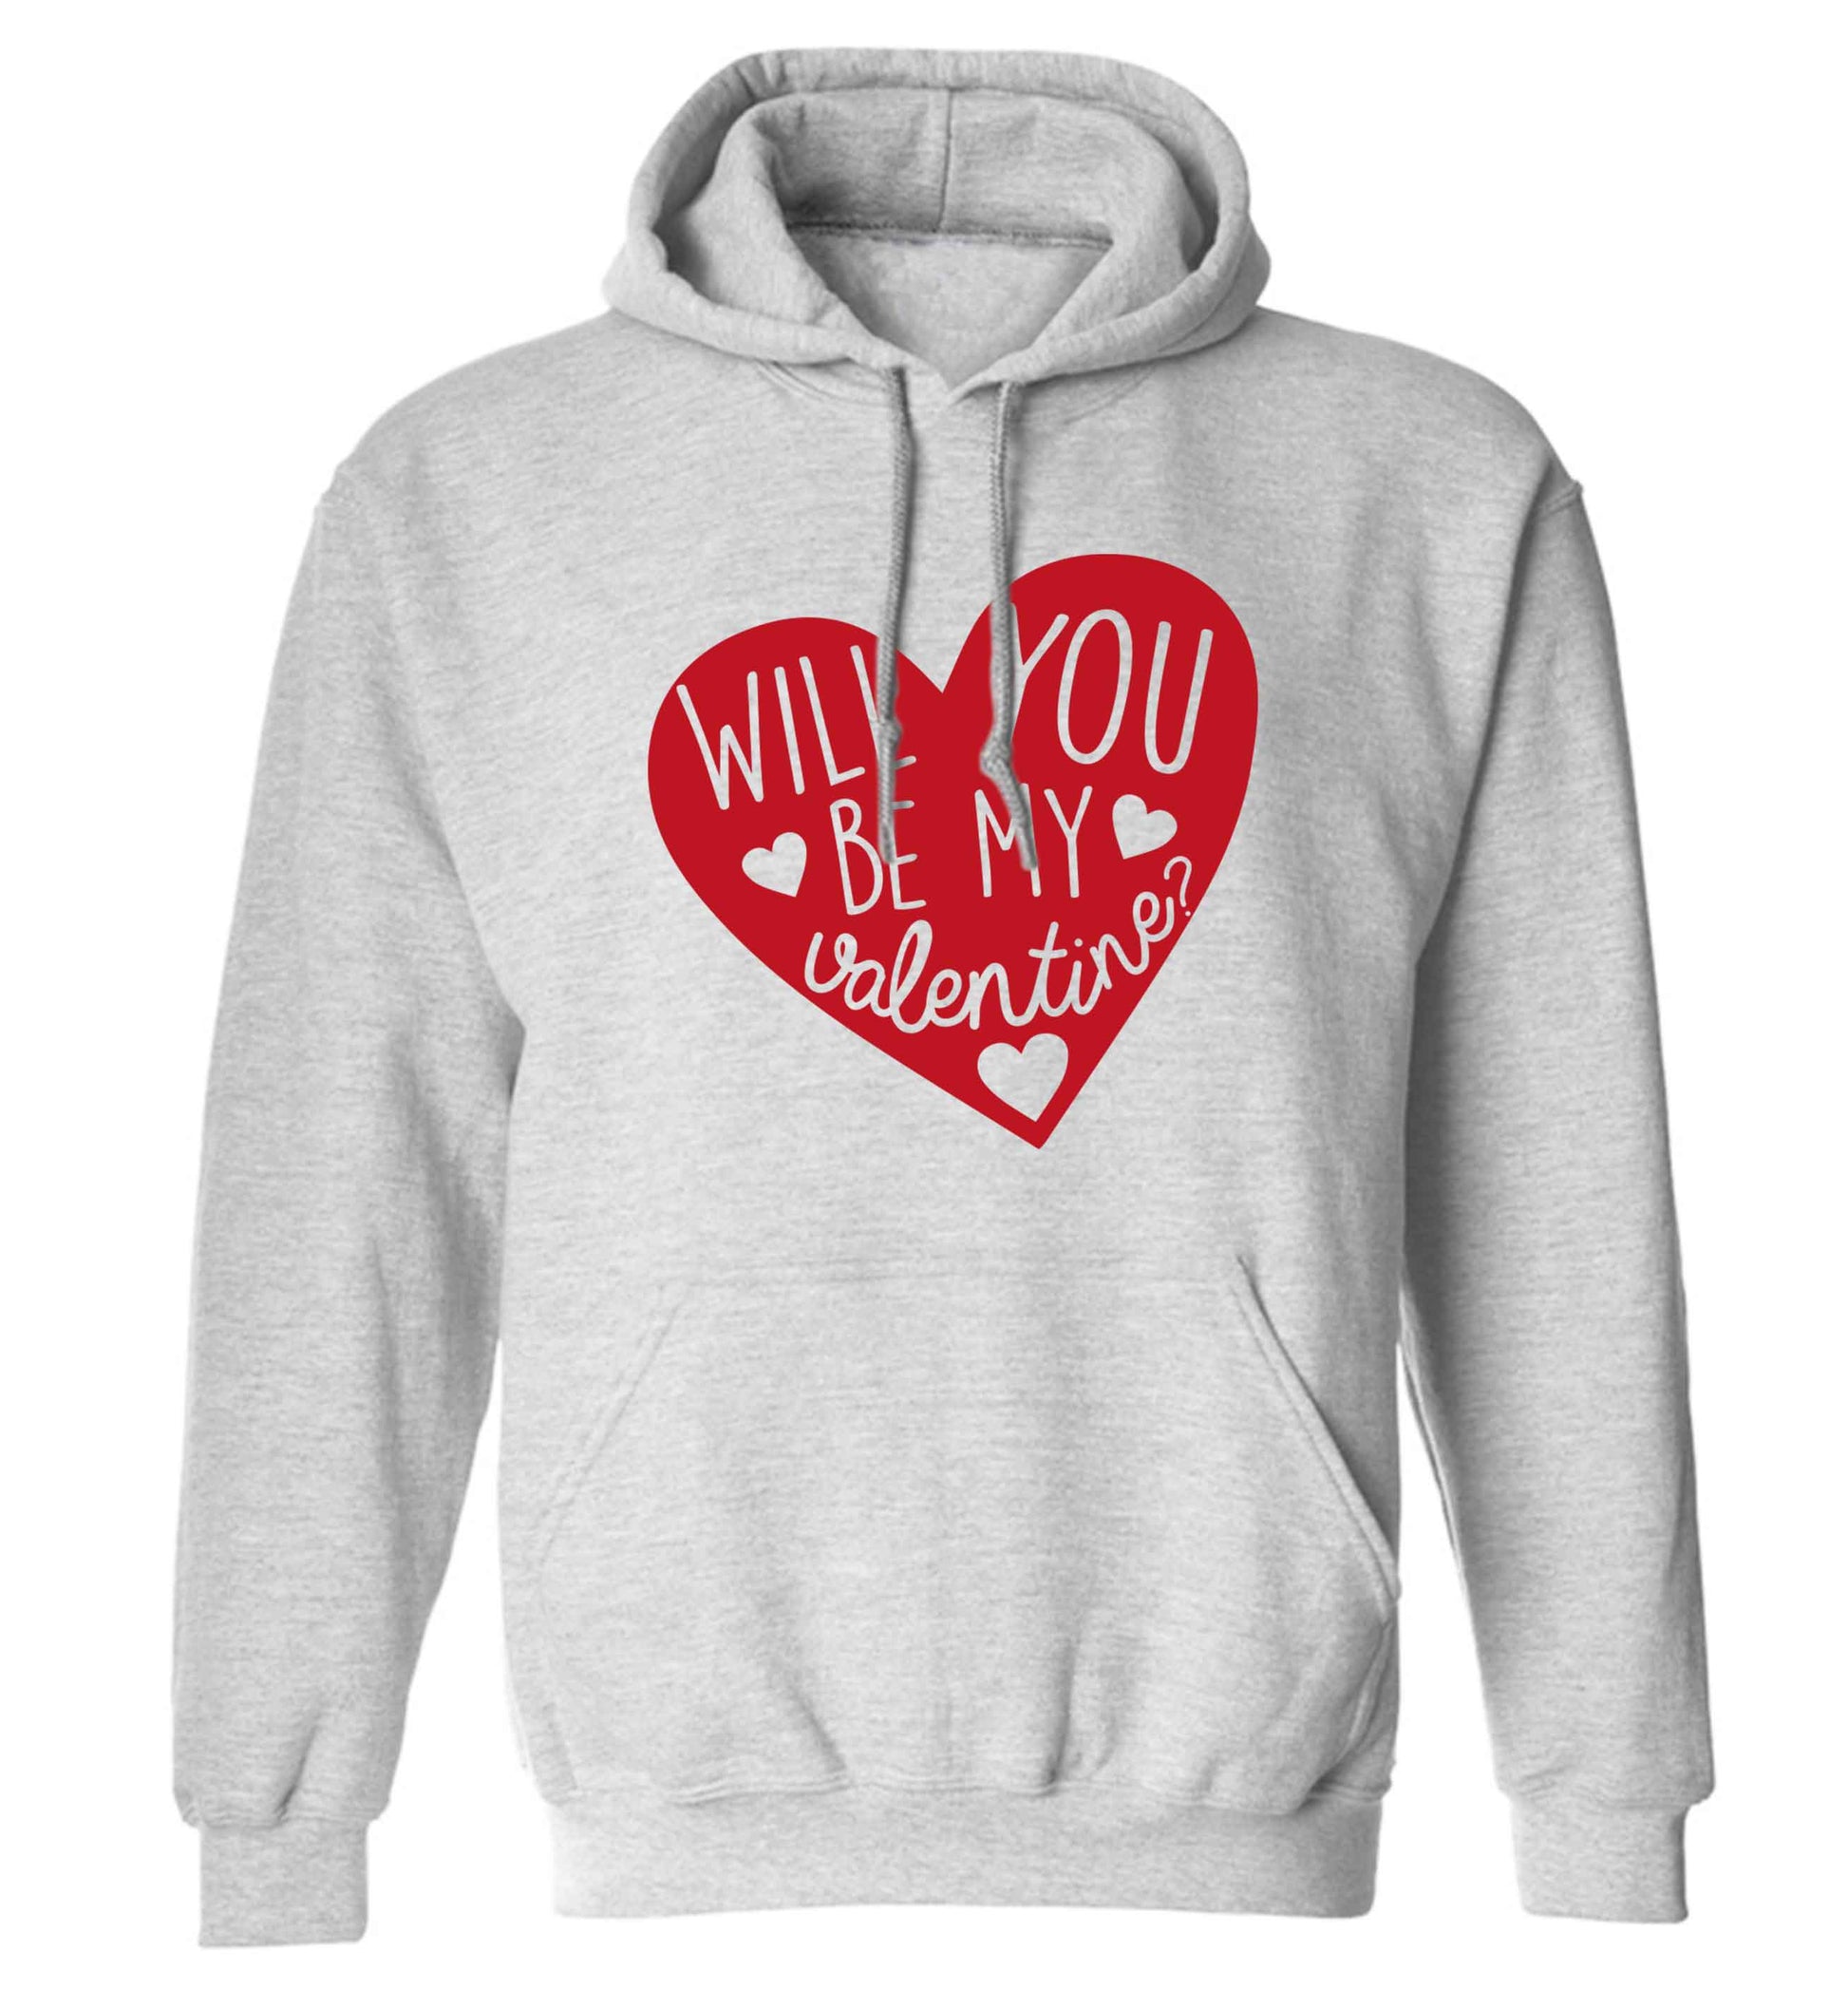 Will you be my valentine? adults unisex grey hoodie 2XL